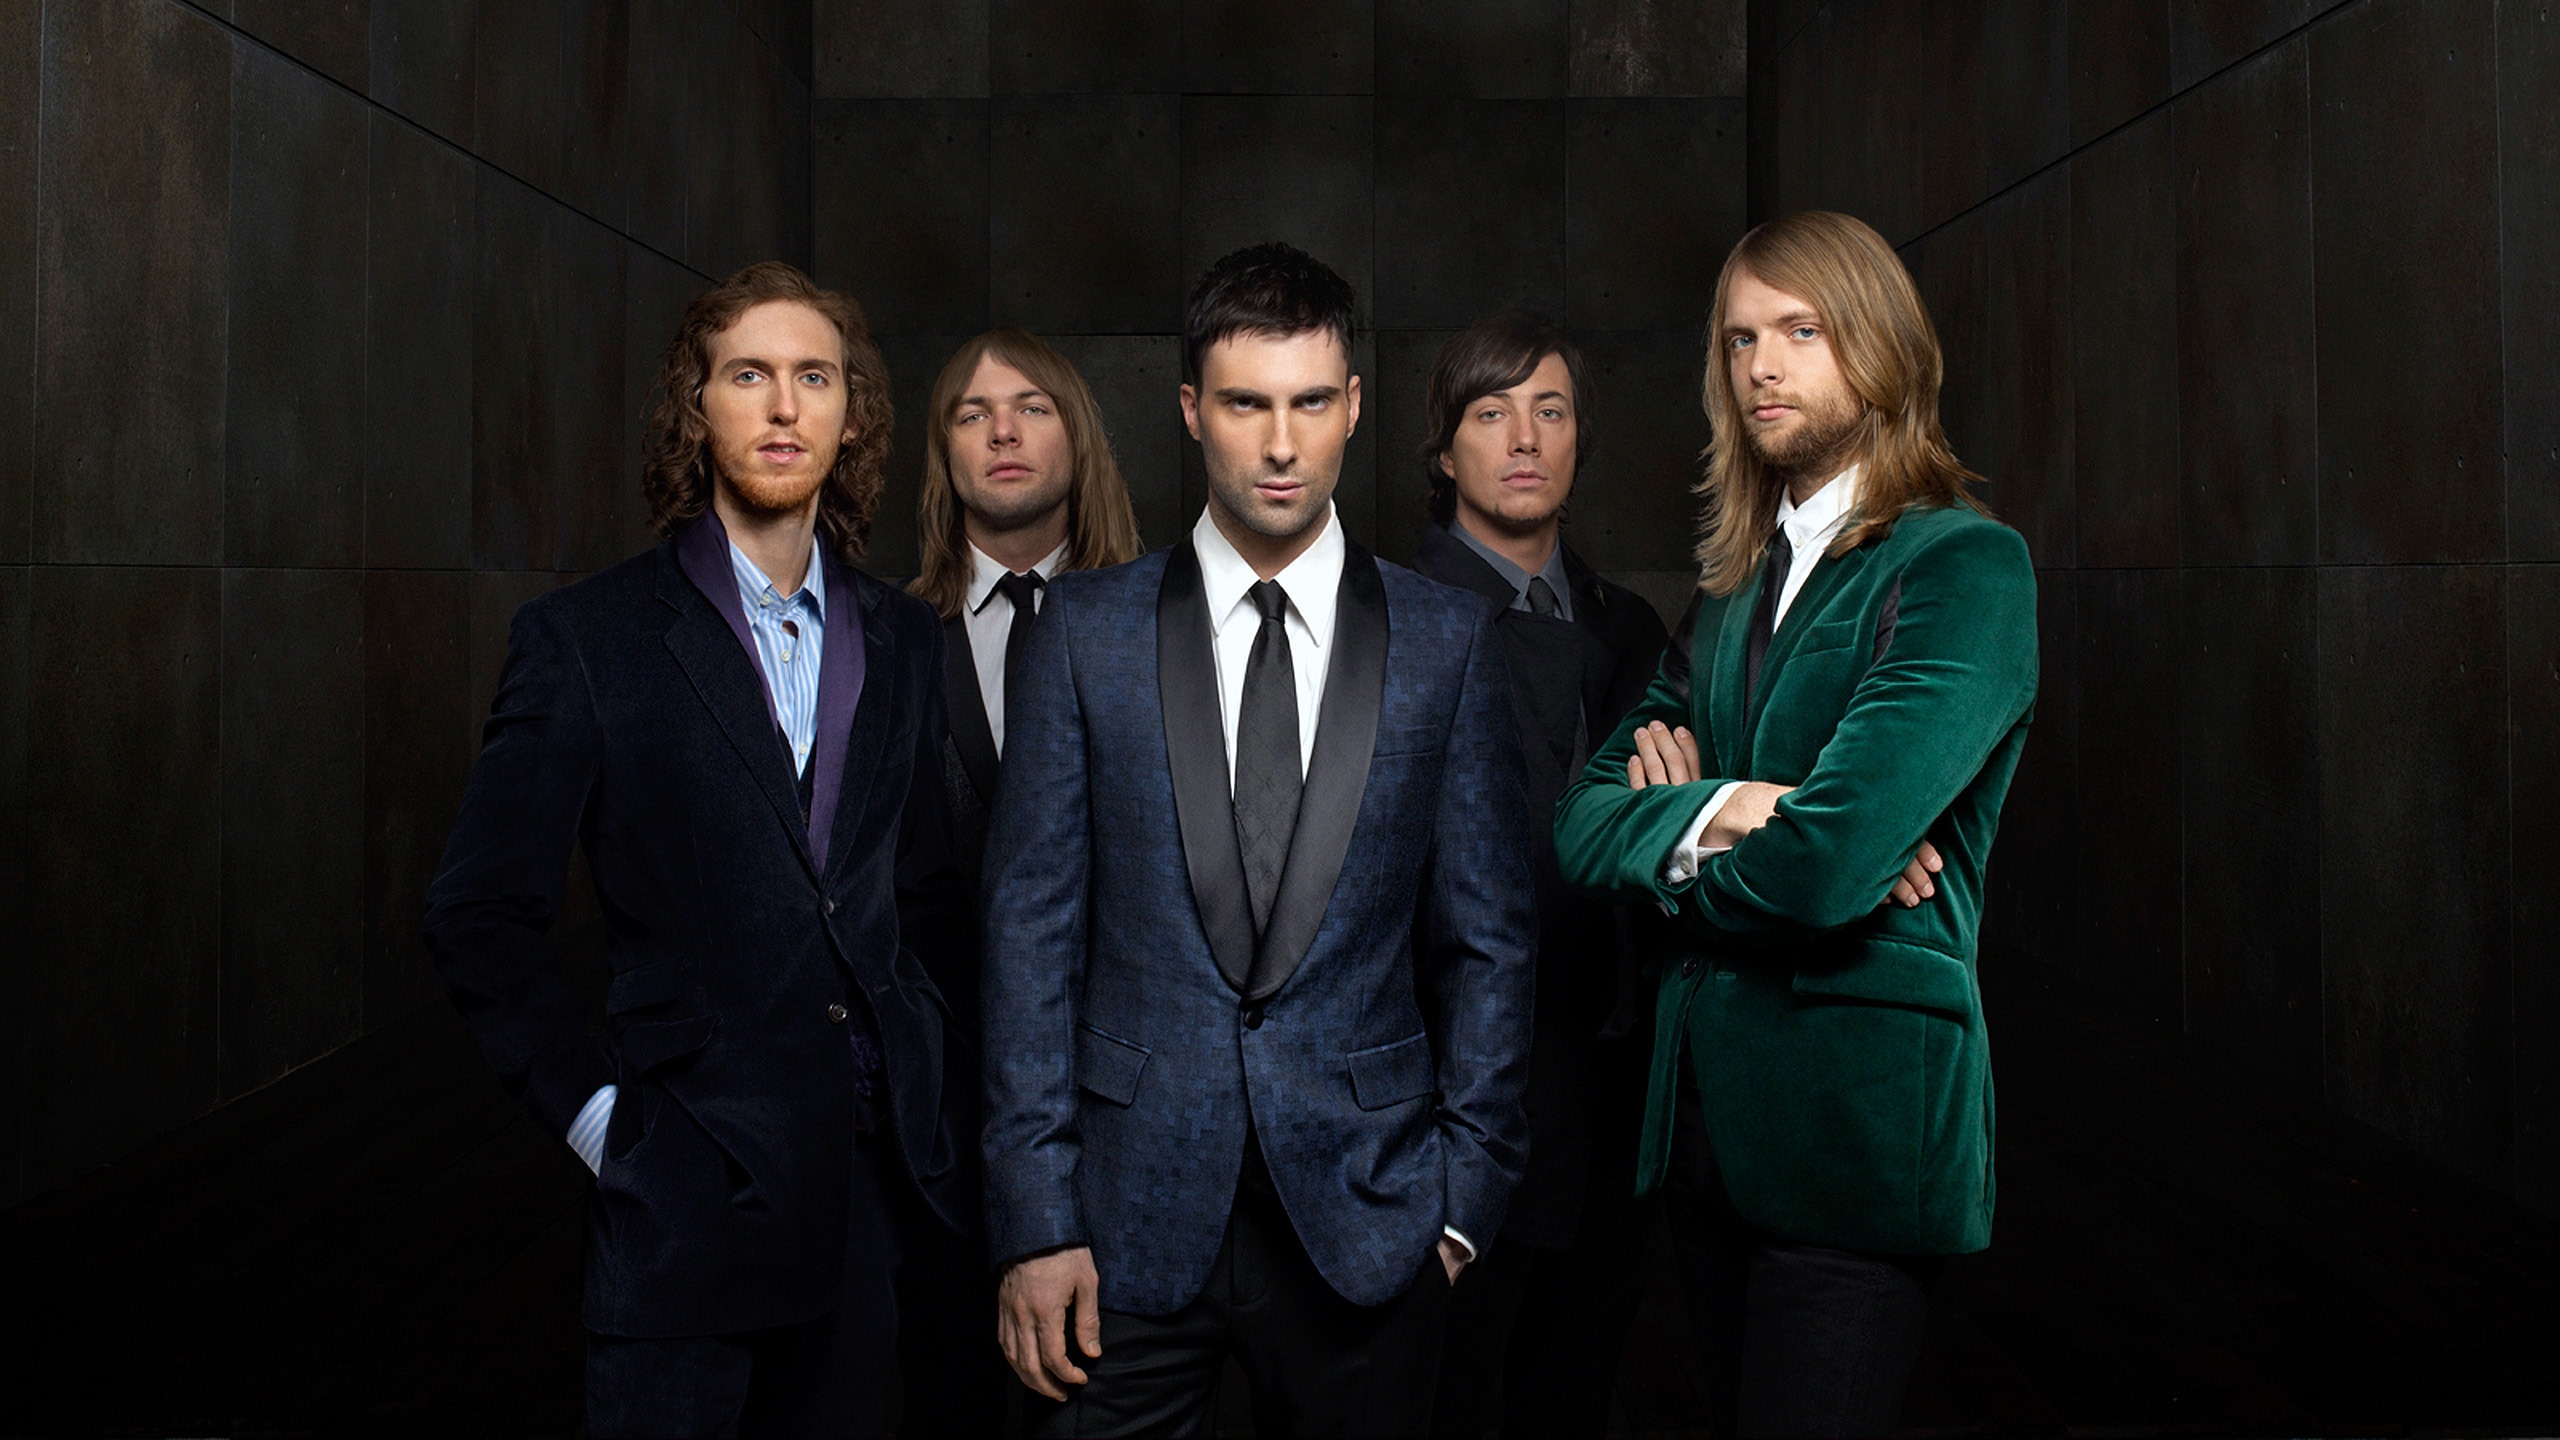 Maroon 5 Band for 2560x1440 HDTV resolution